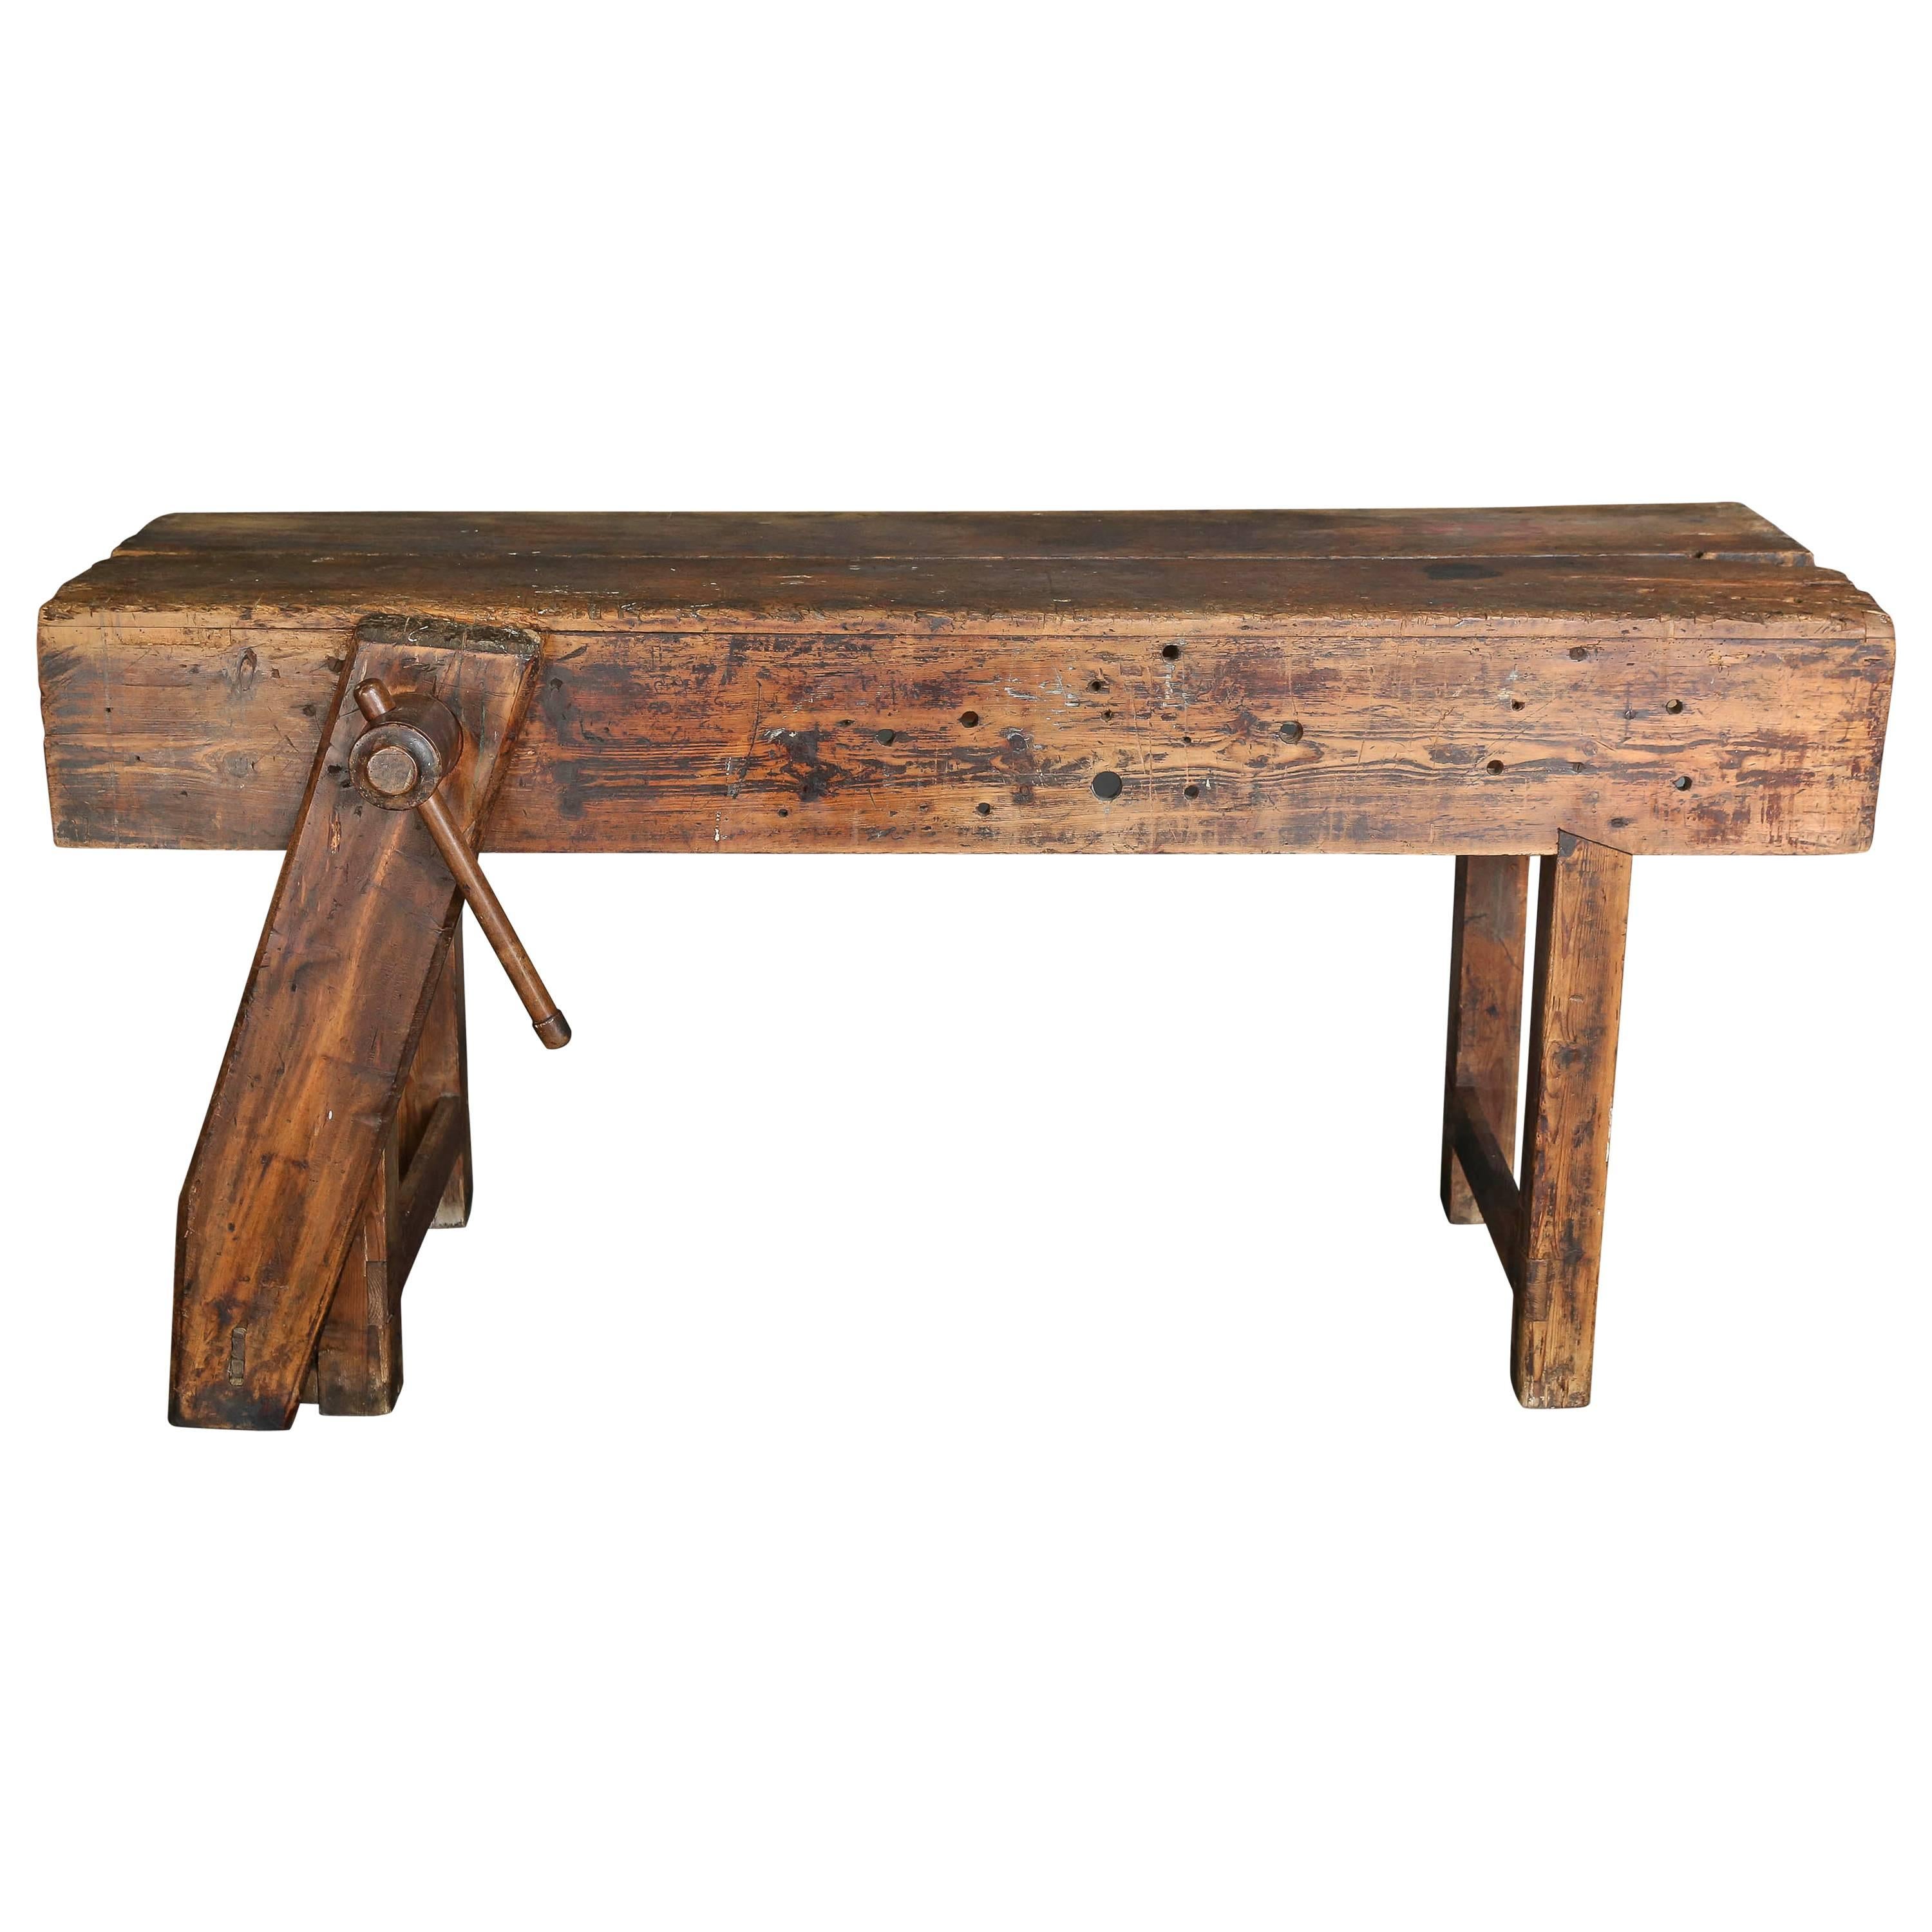 Antique 19th Century French Workbench